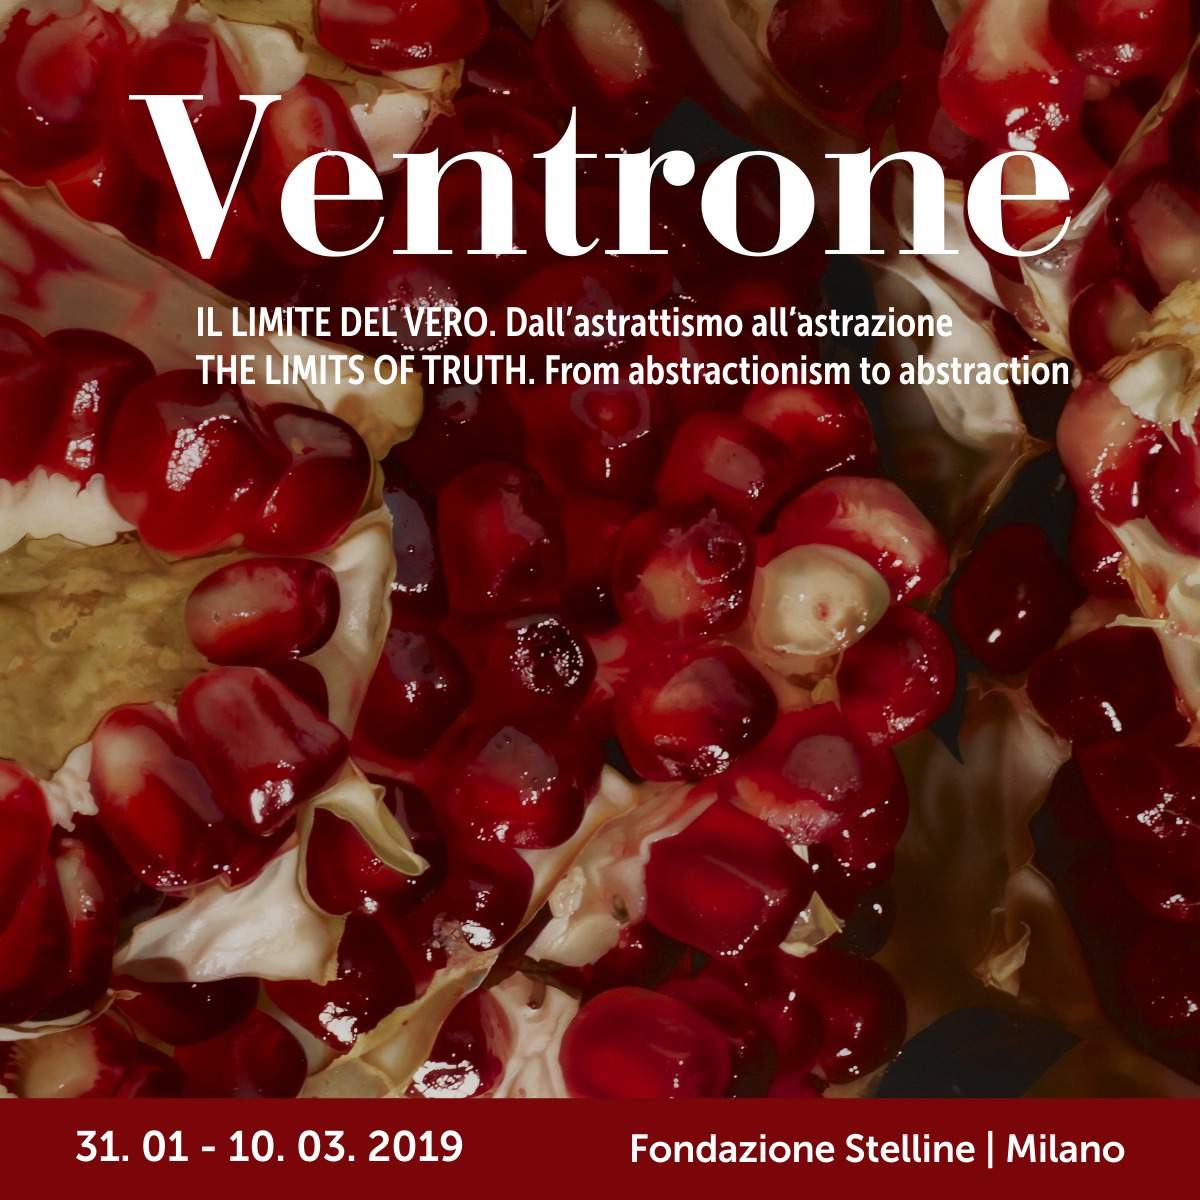 Luciano Ventrone, the Caravaggio of the 20th century, on display at Palazzo delle Stelline, Milan